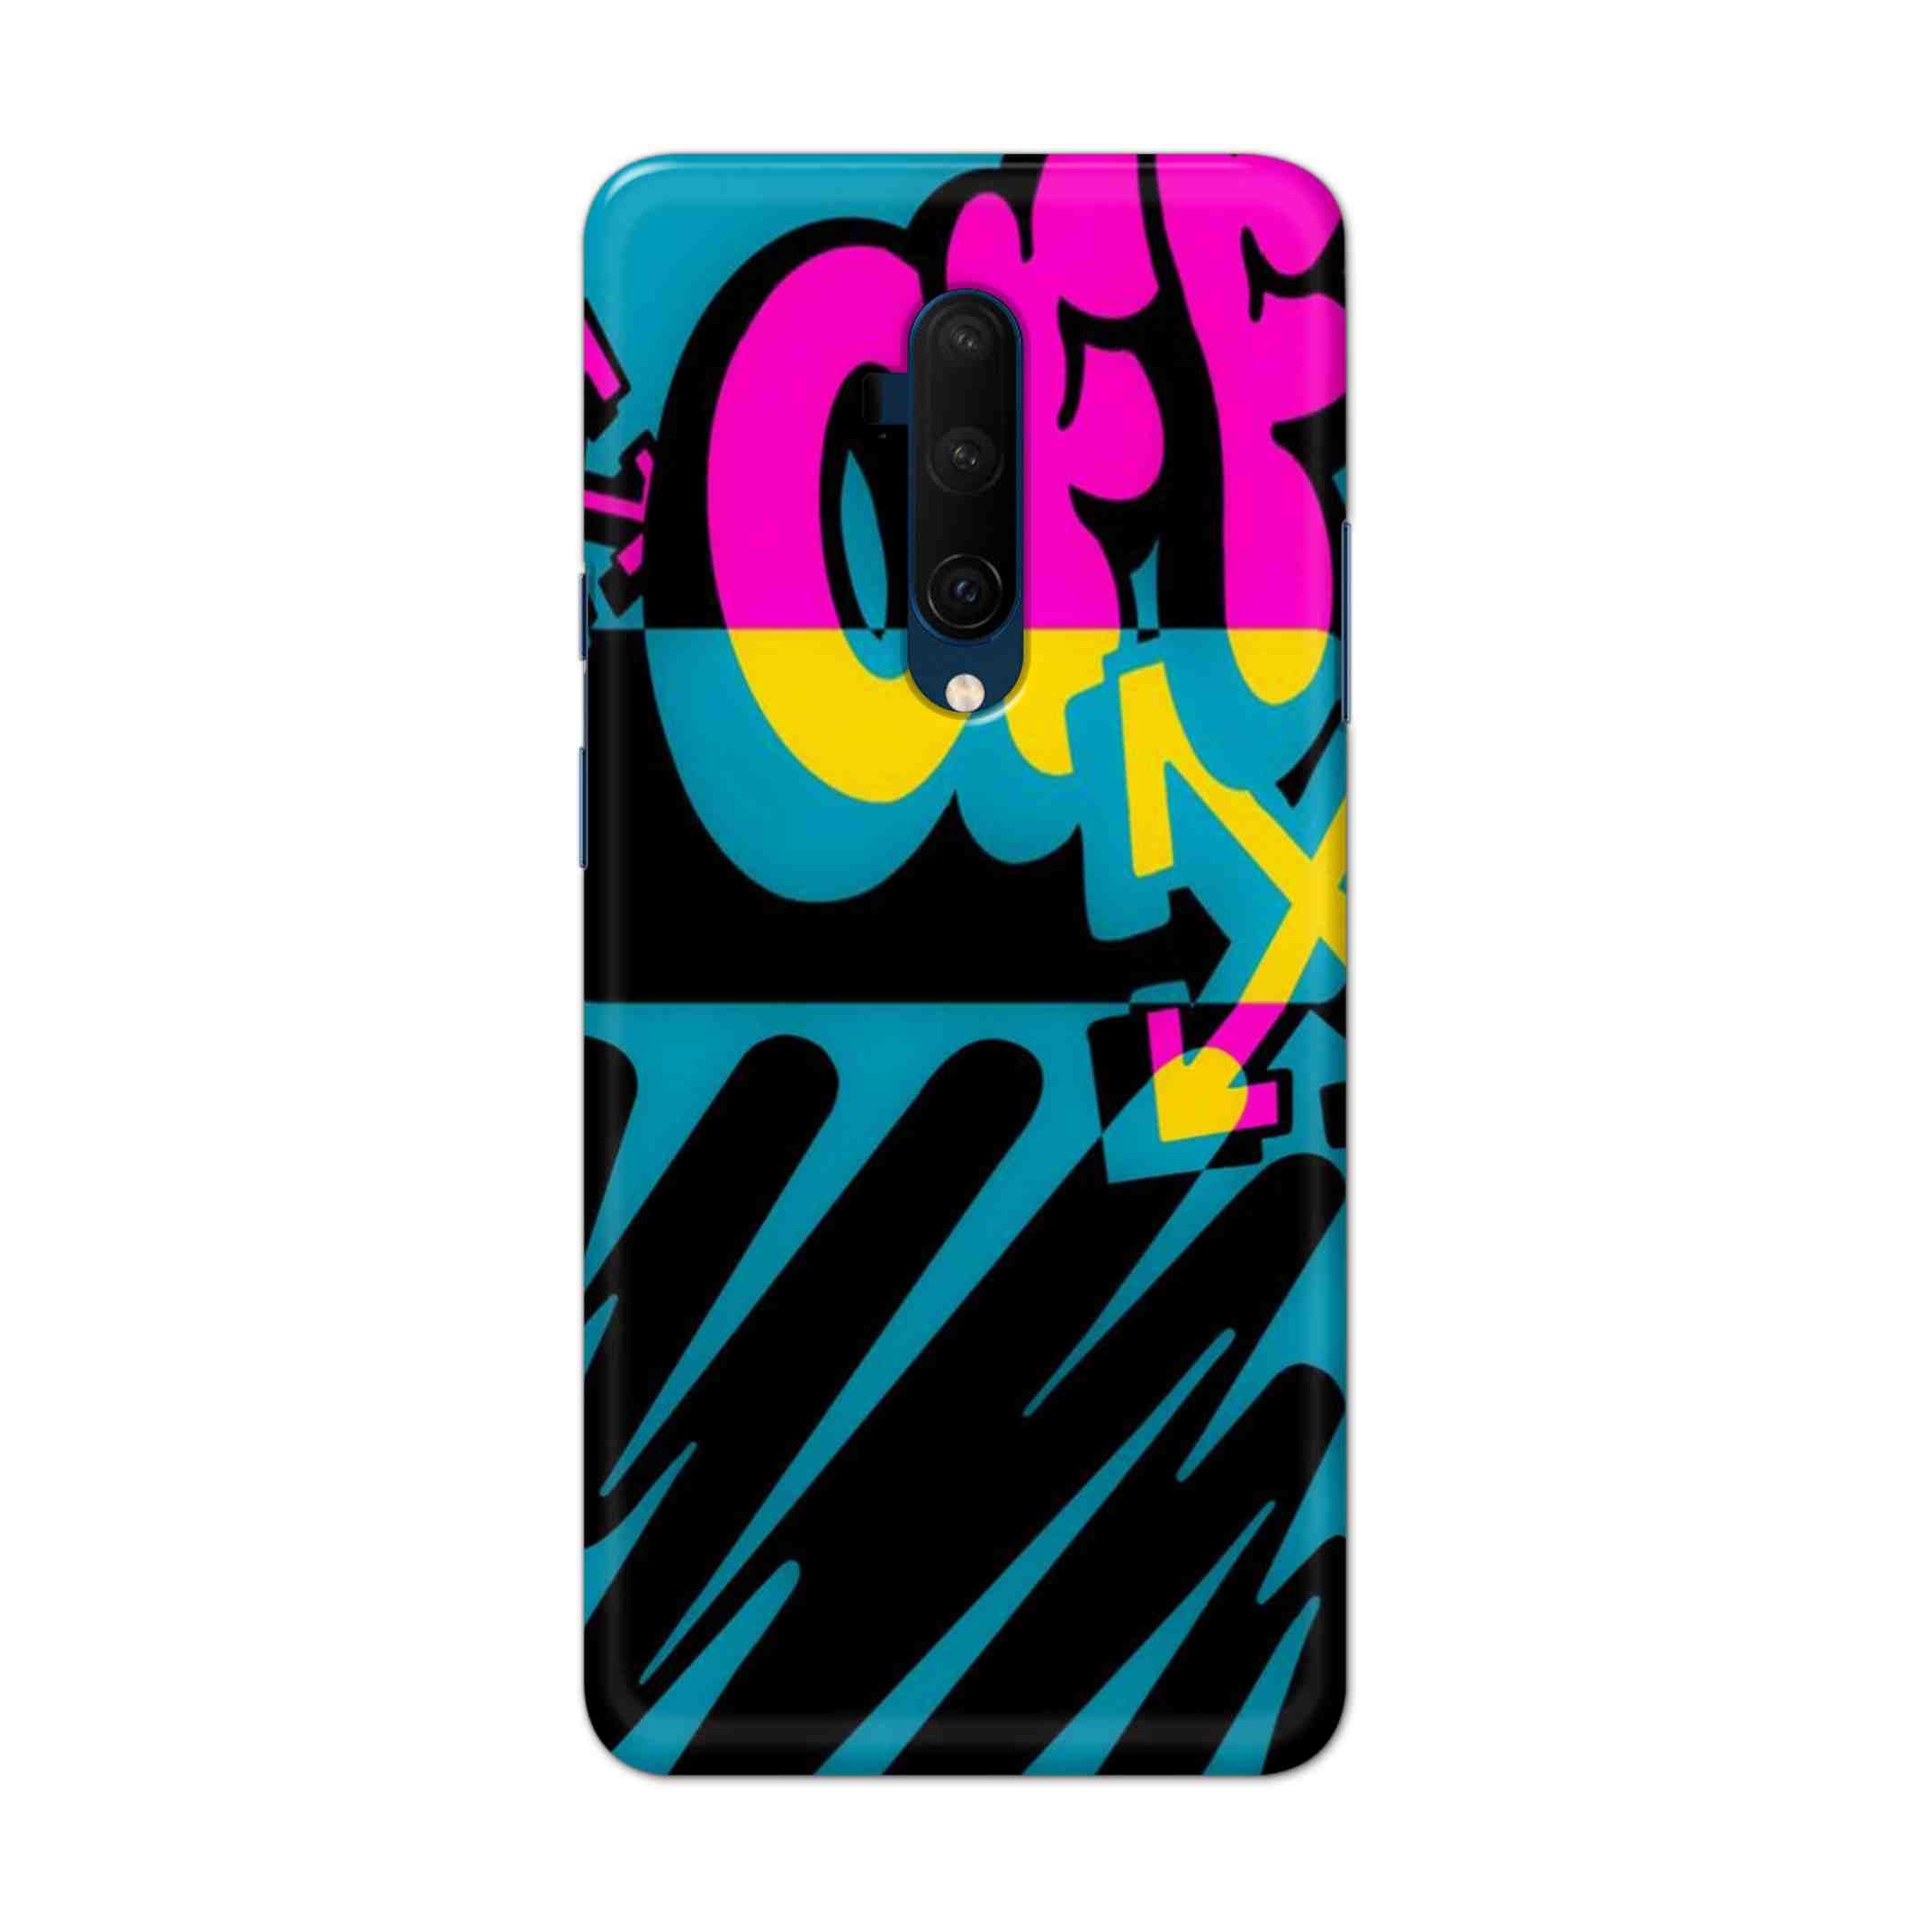 Buy Off Hard Back Mobile Phone Case Cover For OnePlus 7T Pro Online